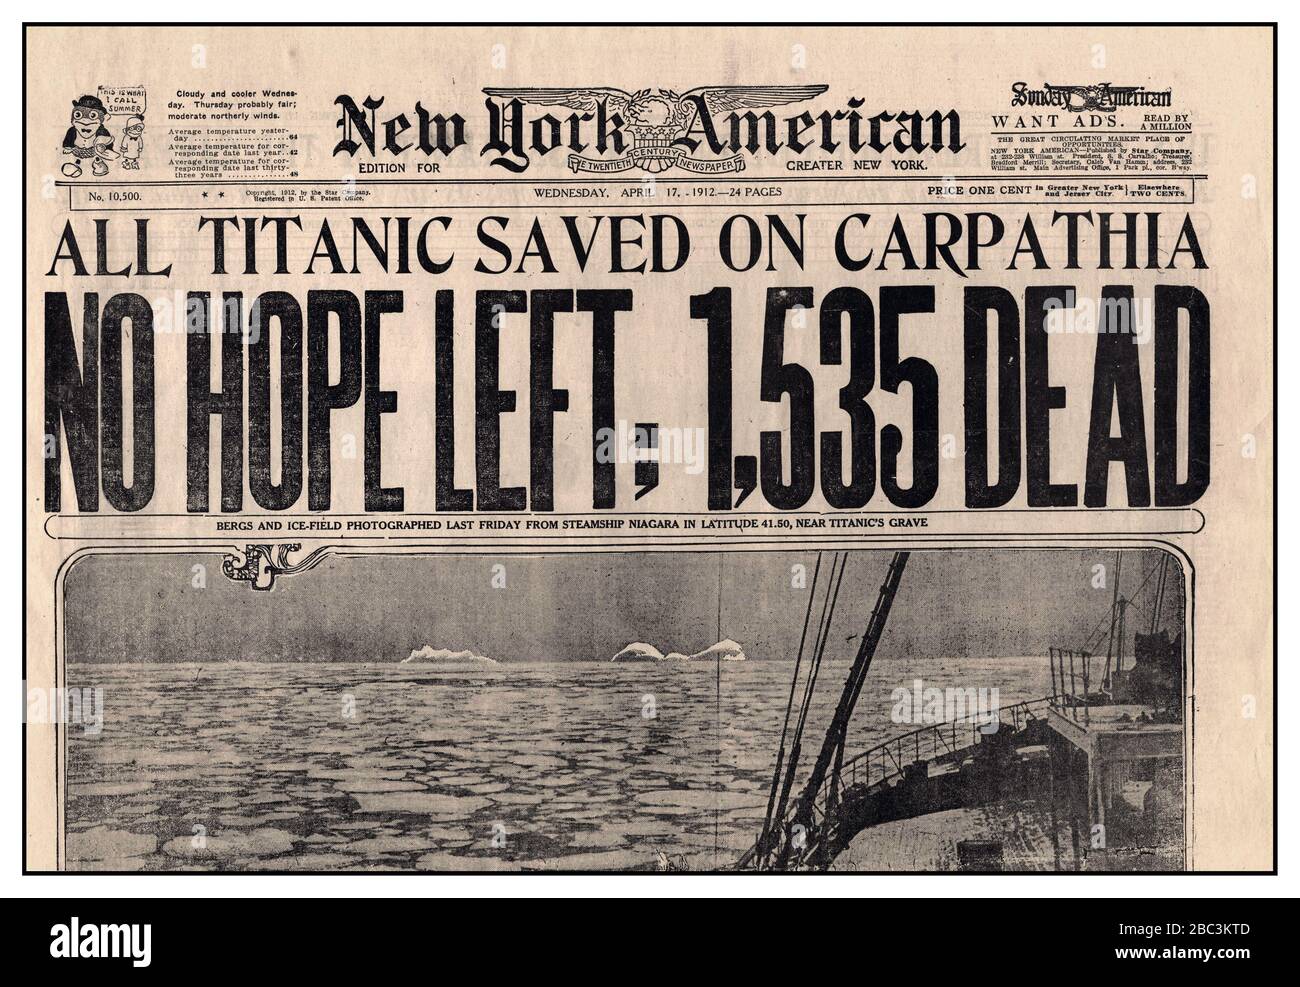 TITANIC NEWS historic vintage archive newspaper headlines on the New York American Front Page Newspaper April 17th 1912 all Titanic saved on Carpathia NO HOPE LEFT 1535 DEAD The RMS Titanic sank in the early morning hours of 15 April 1912 in the North Atlantic Ocean, four days into the ship's maiden voyage from Southampton to New York City. Stock Photo